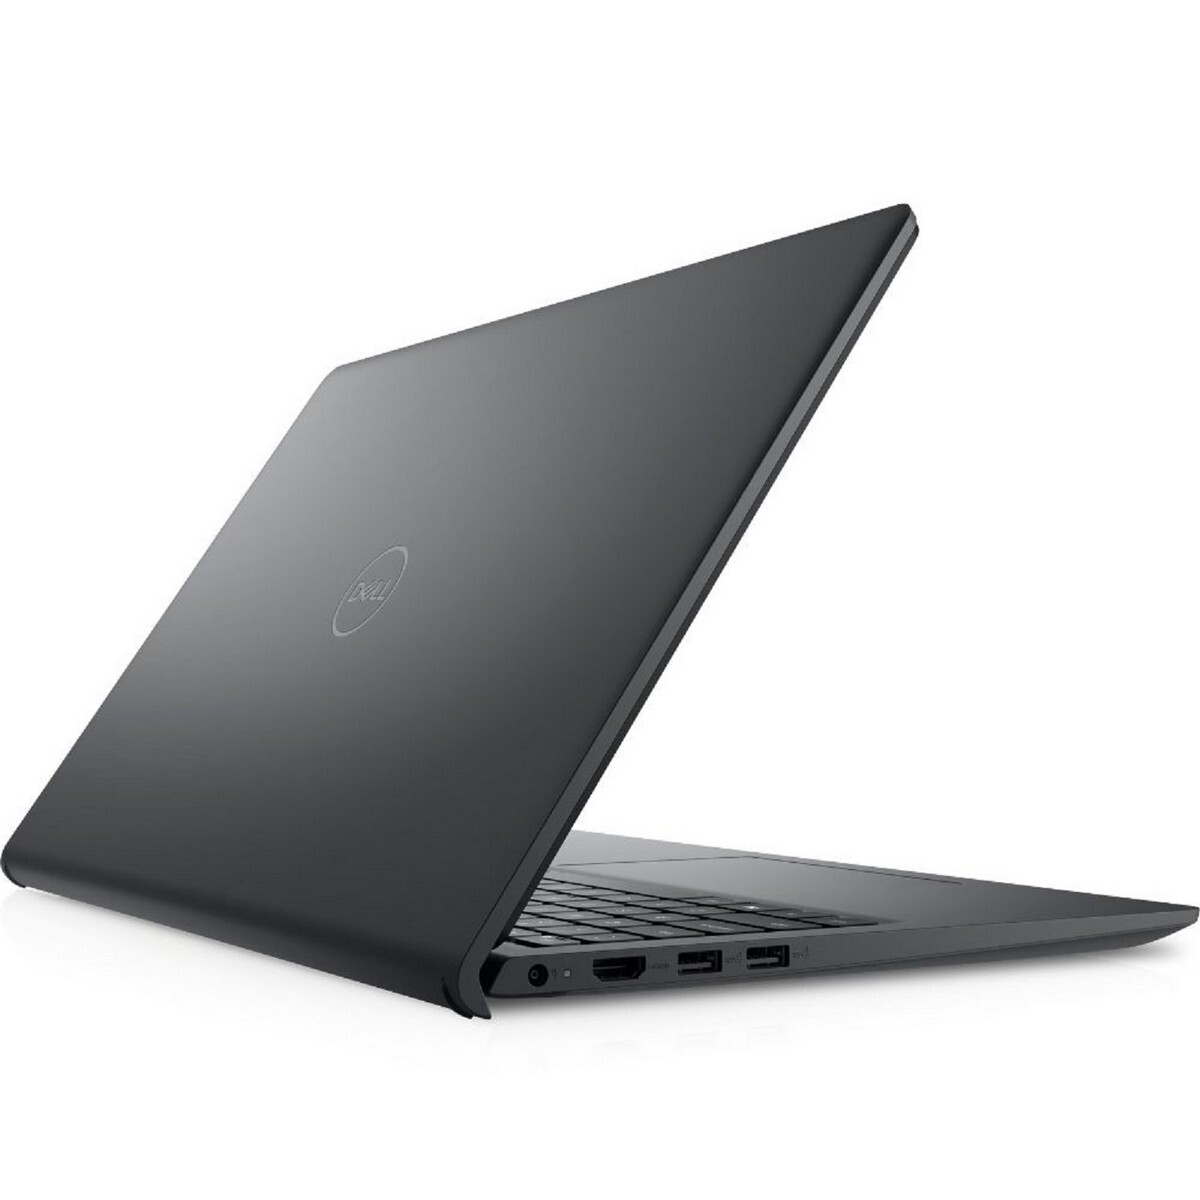 DELL Core i3 12th Gen  GB/512 GB SSD/Windows 11 Home nspiron 15 Laptop Thin and Light Laptop